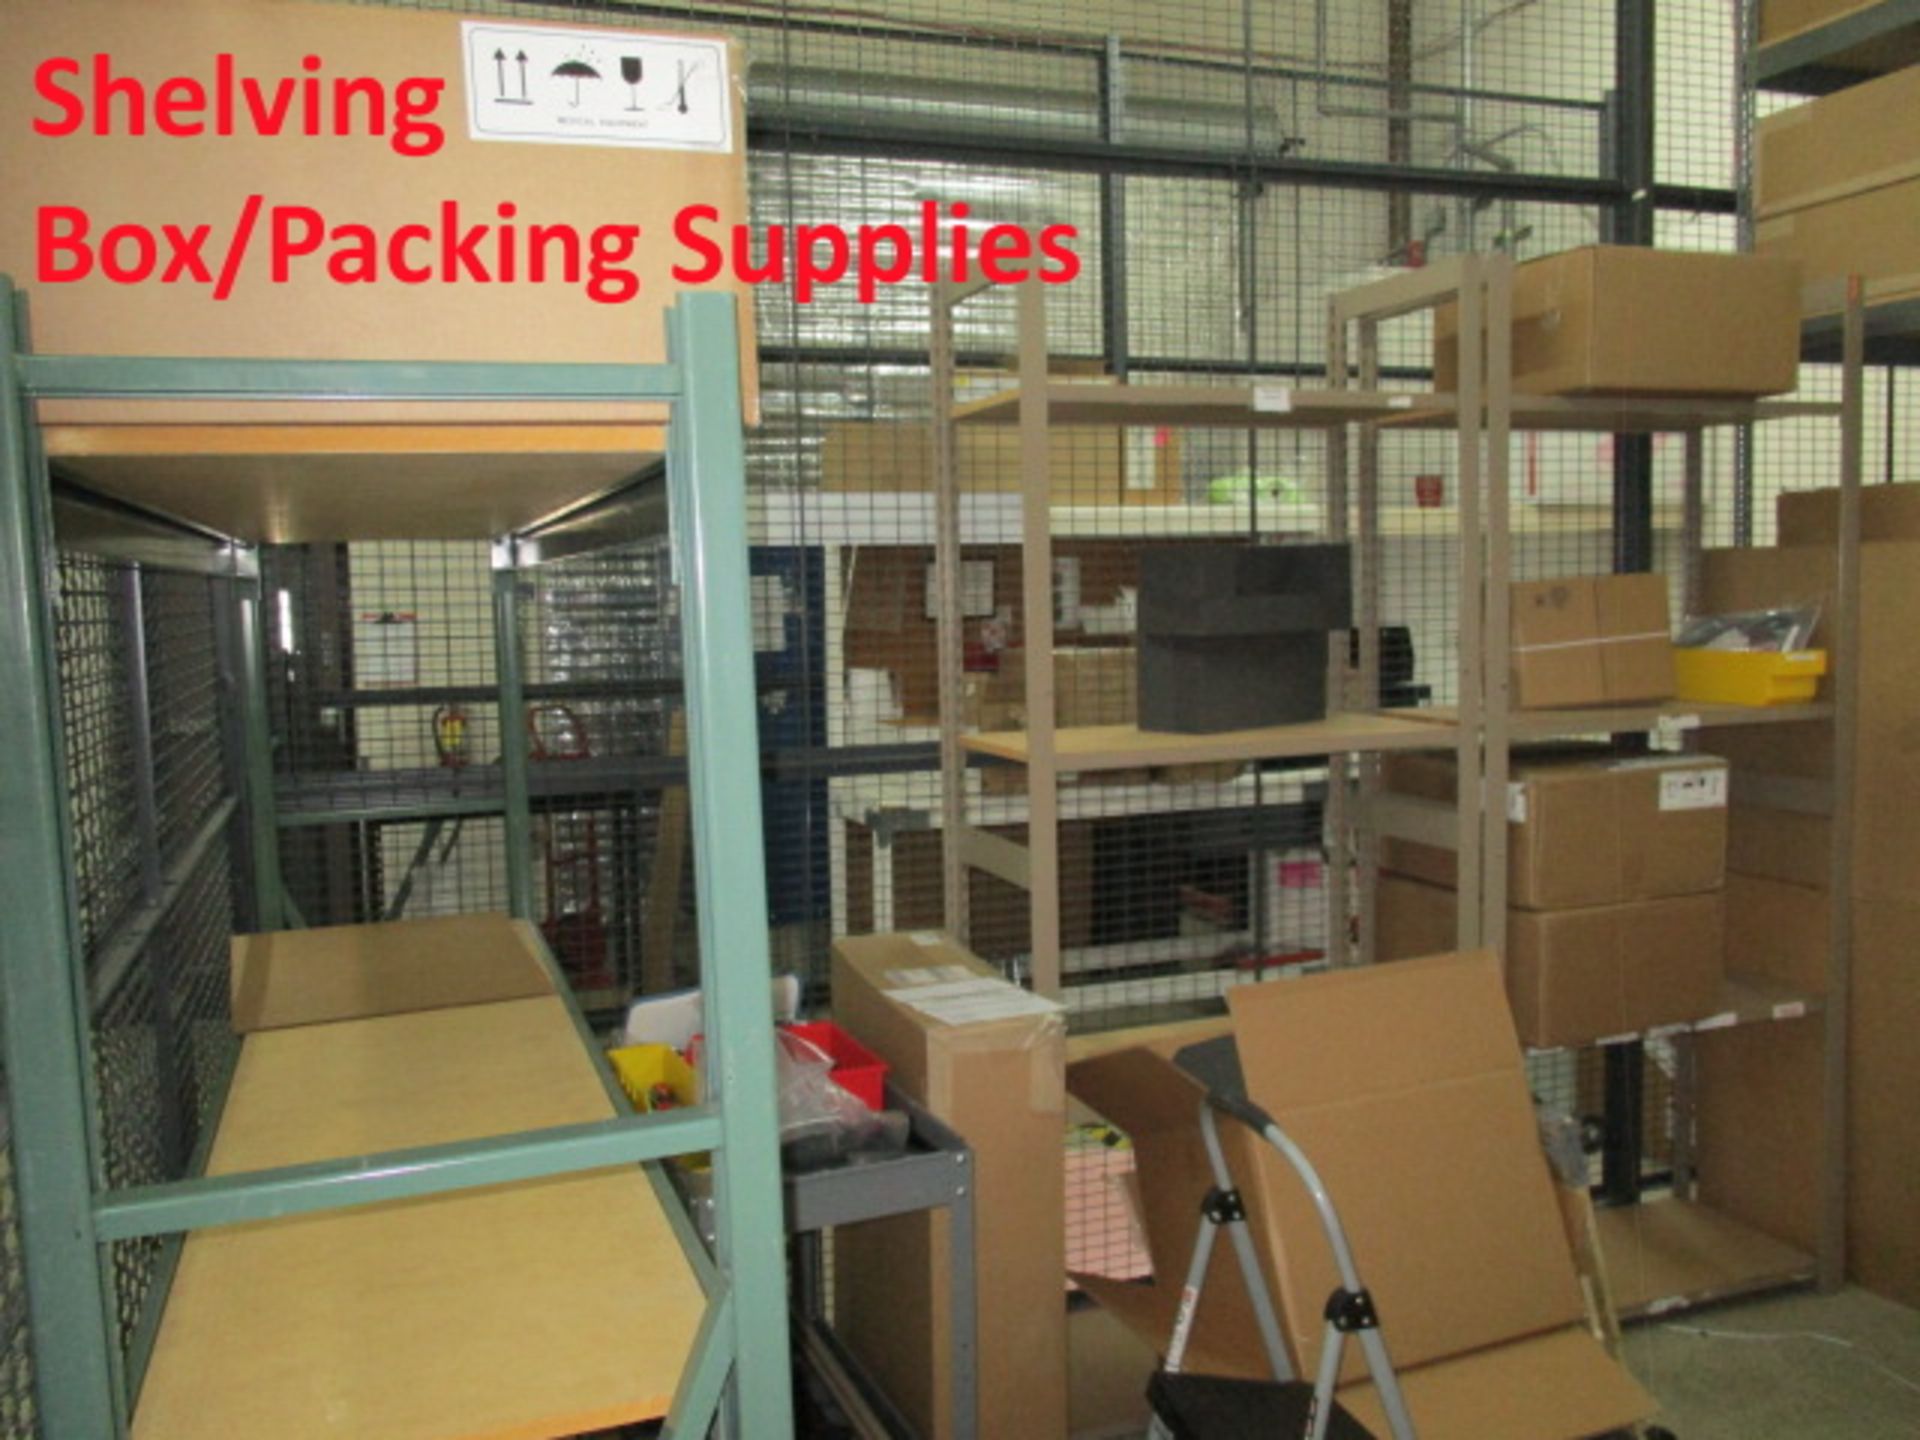 Shipping Room Furniture With Contents Of Box Packing Supplies. [Furniture: Particle-Board/Metal- - Image 2 of 4